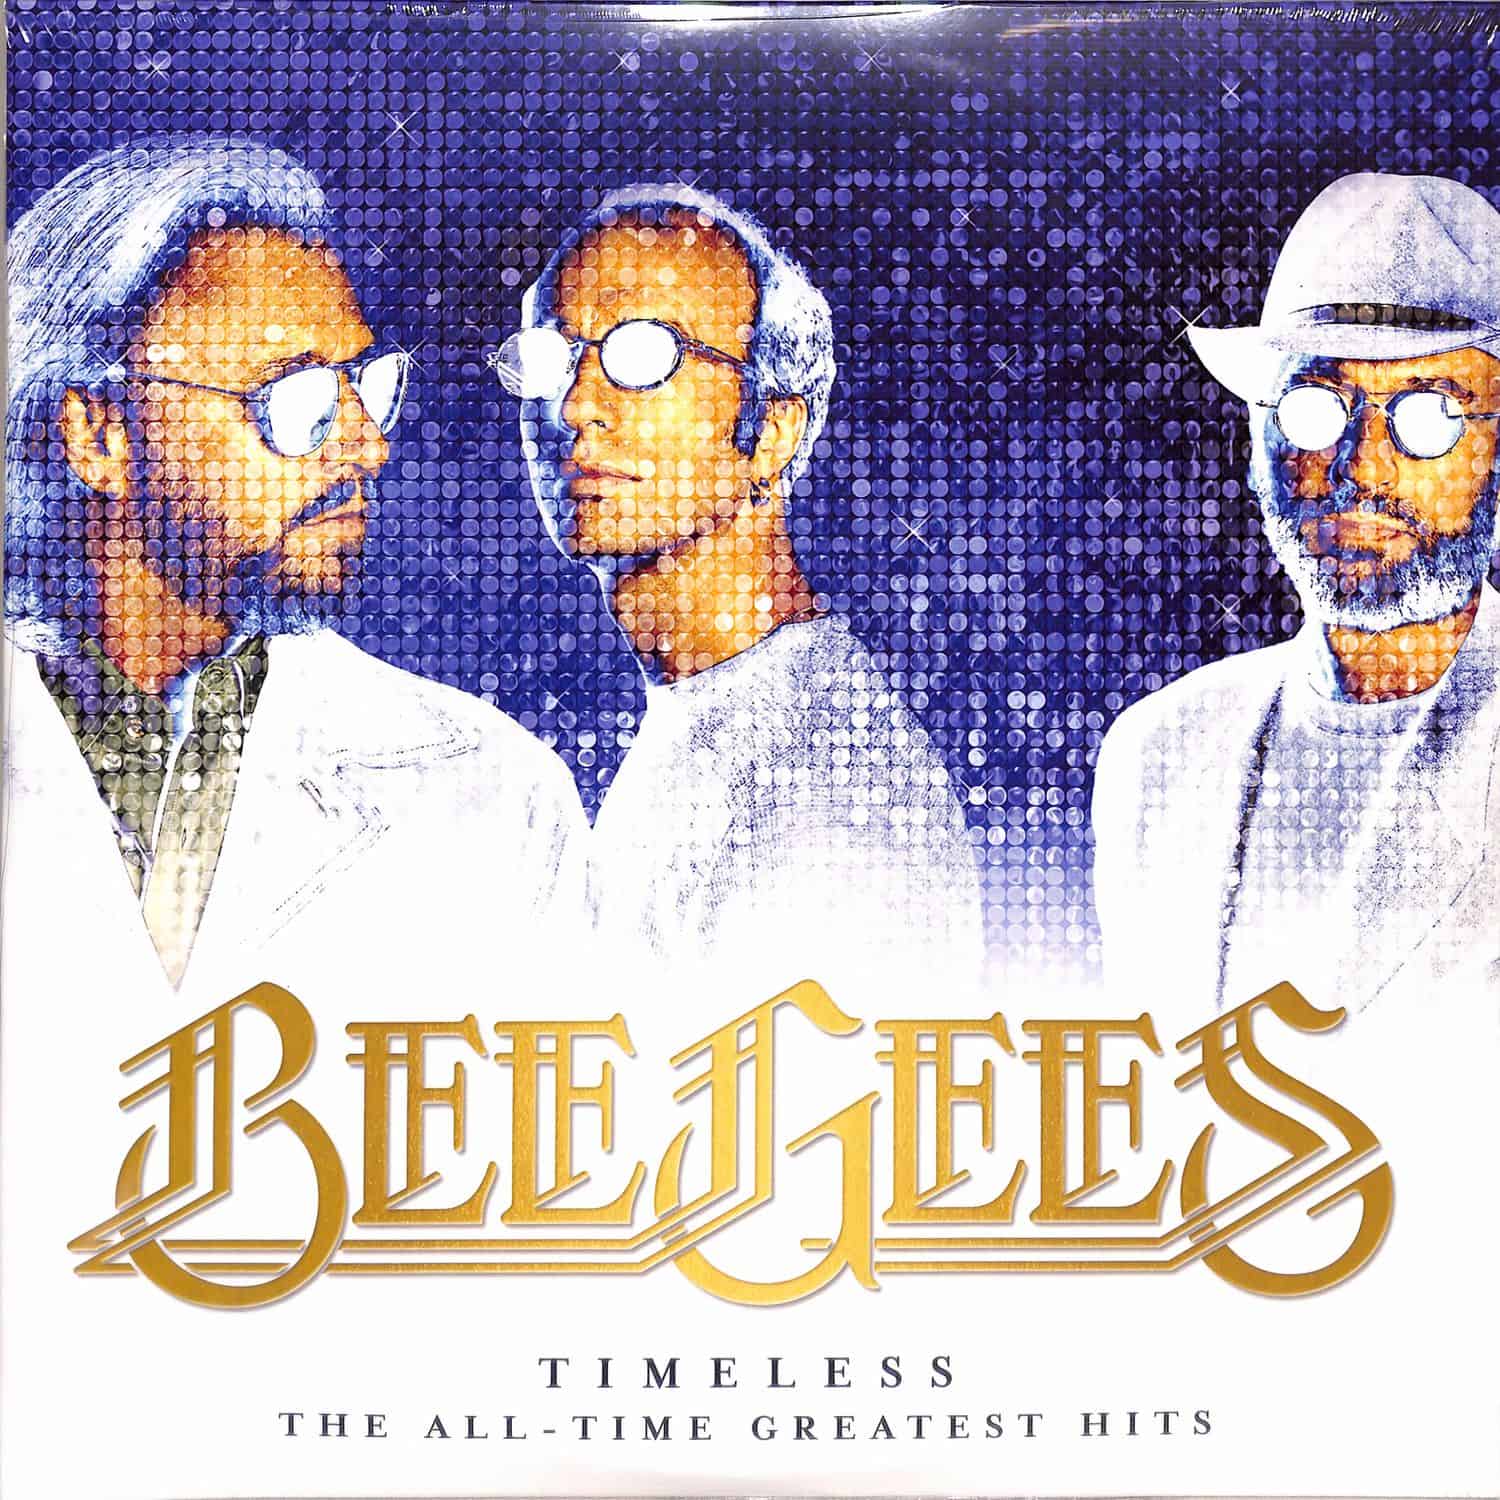 Bee Gees - TIMELESS - THE ALL-TIME GREATEST HITS 